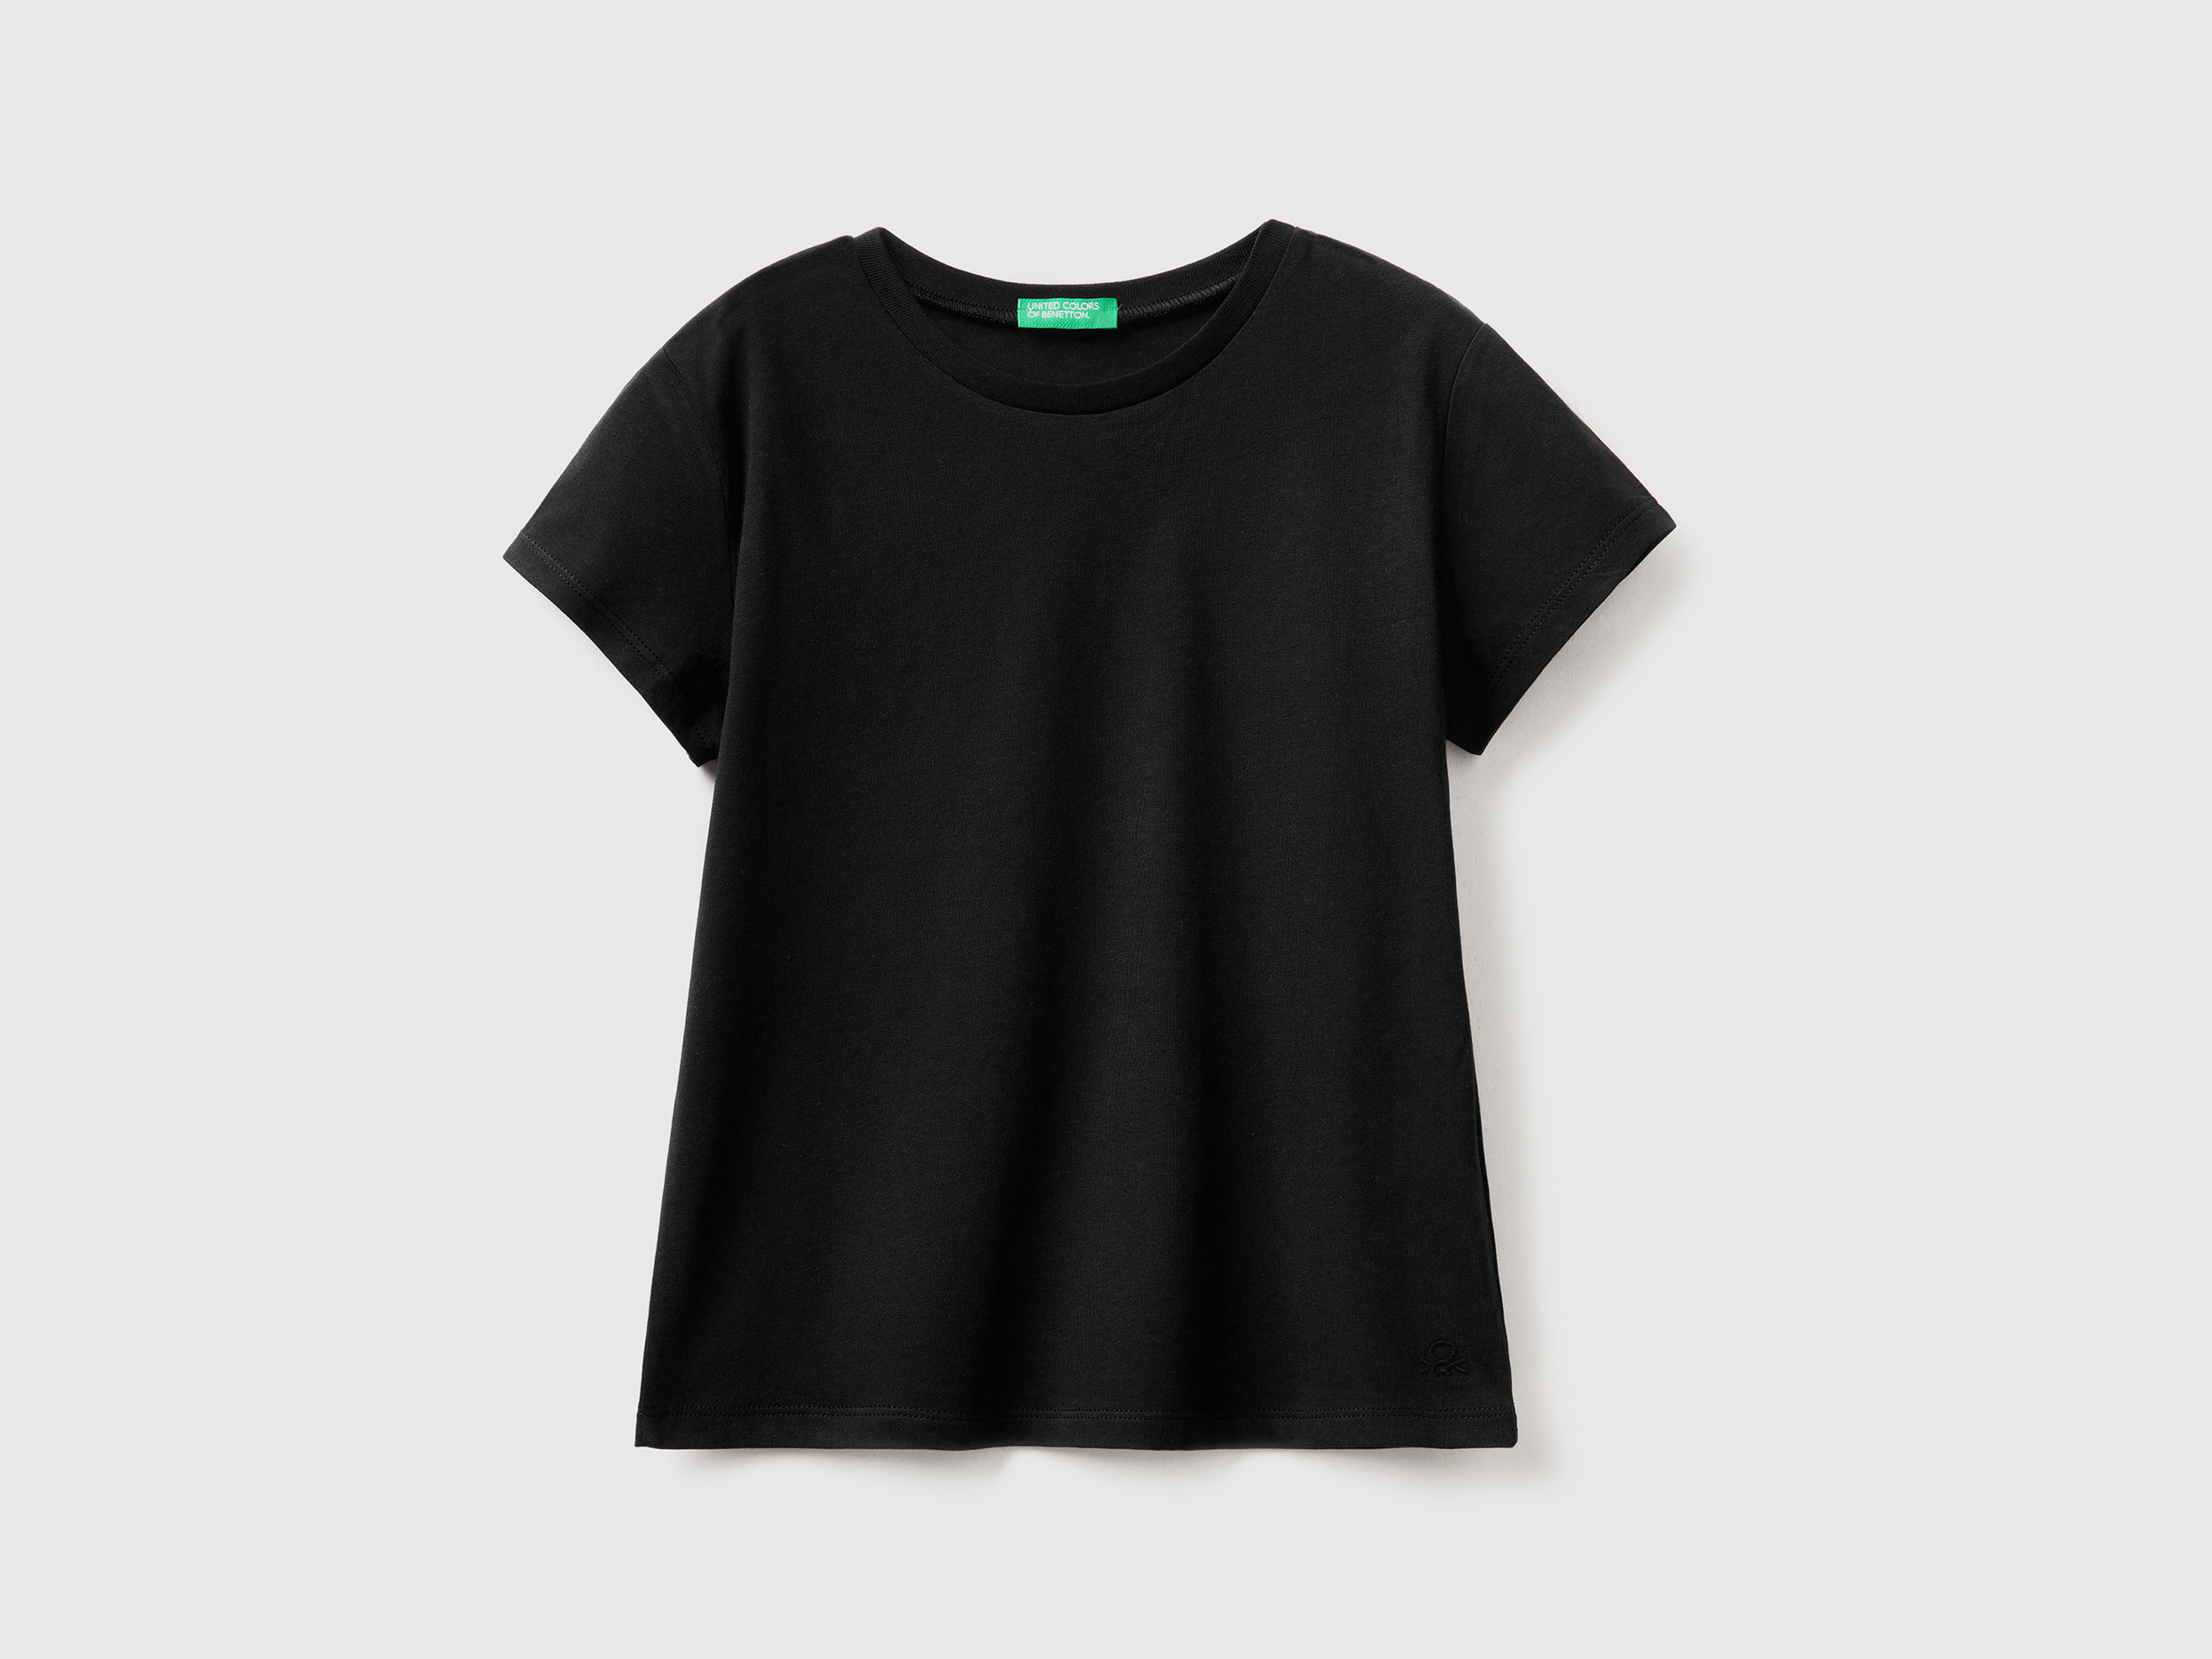 Image of Benetton, T-shirt In Pure Organic Cotton, size XL, Black, Kids